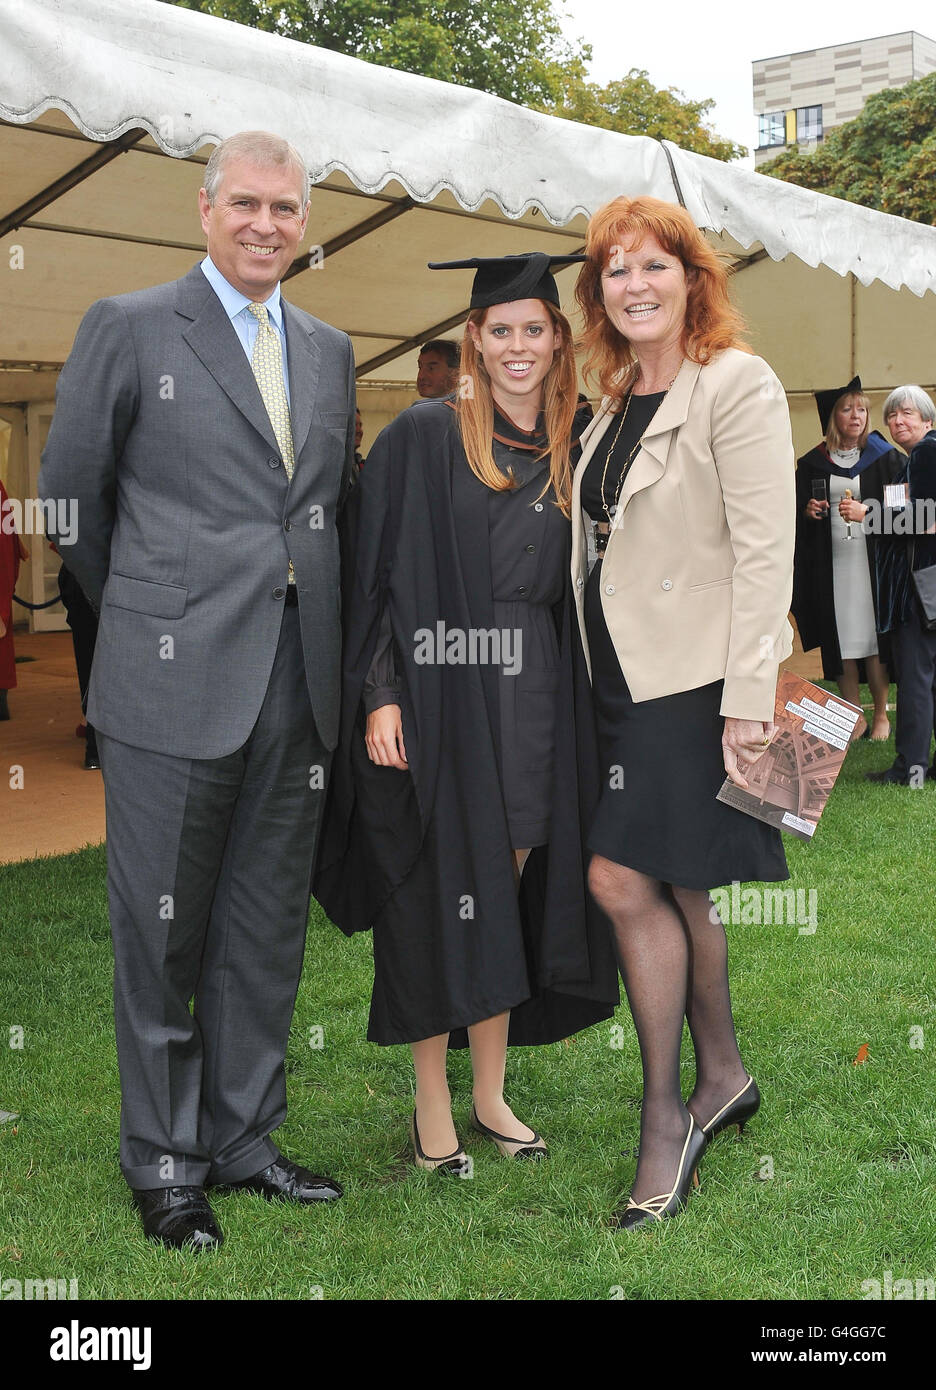 The Duke York (left) and Sarah, Duchess of York (right) meet their daughter, Princess Beatrice (centre), following her graduation ceremony at Goldsmiths College, London. Stock Photo